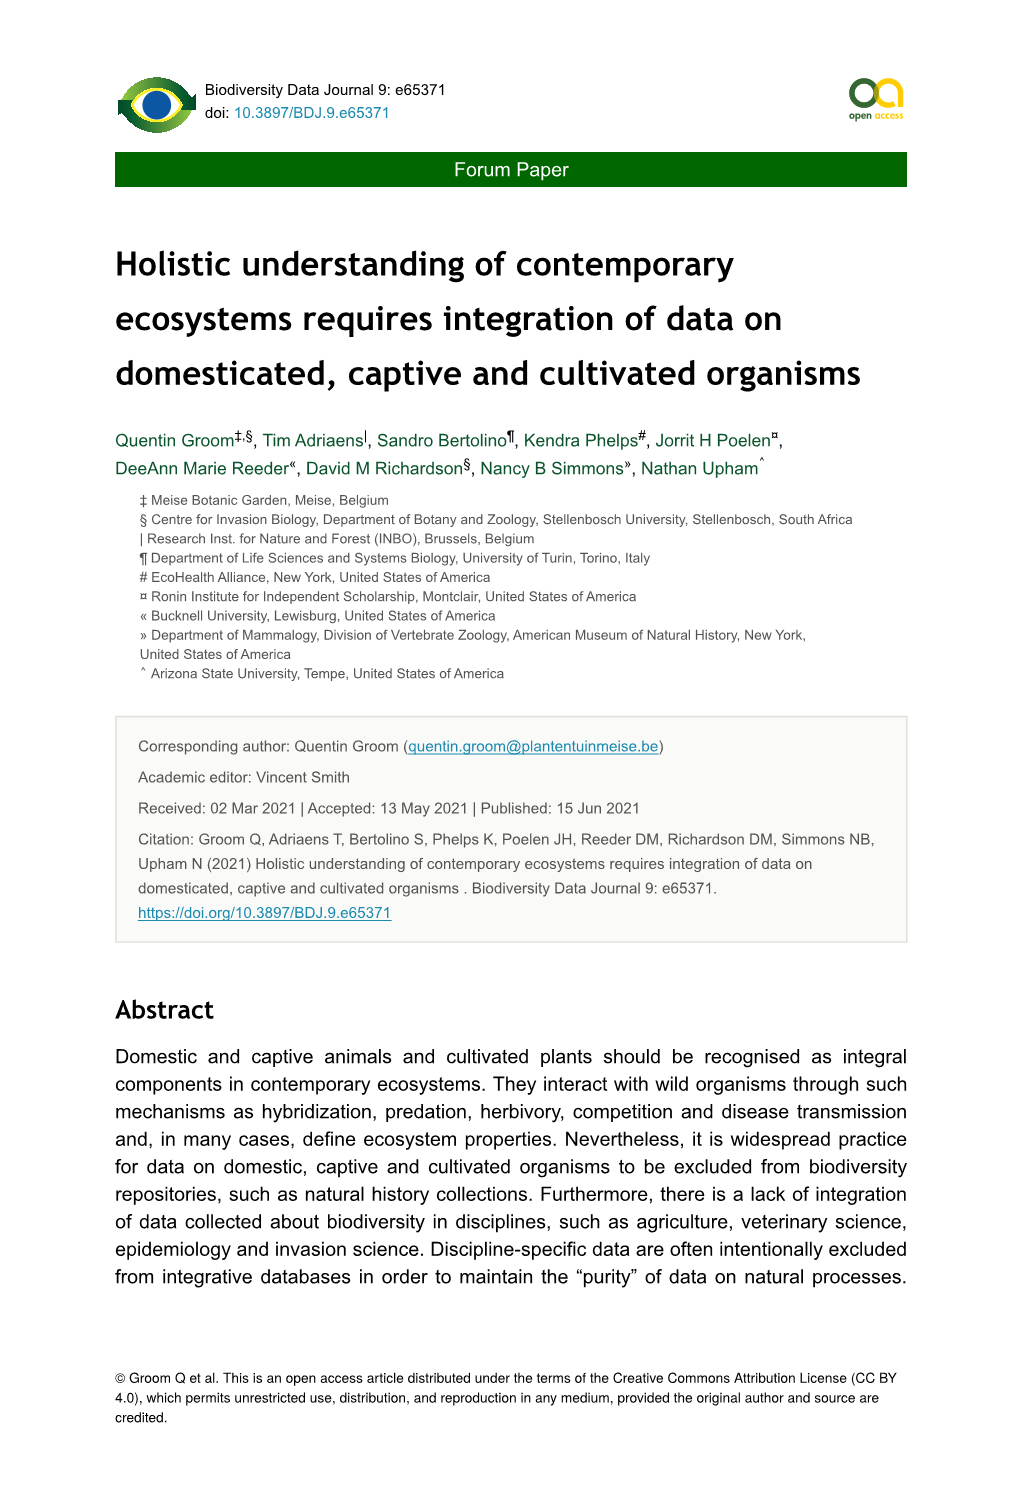 Holistic Understanding of Contemporary Ecosystems Requires Integration of Data on Domesticated, Captive and Cultivated Organisms